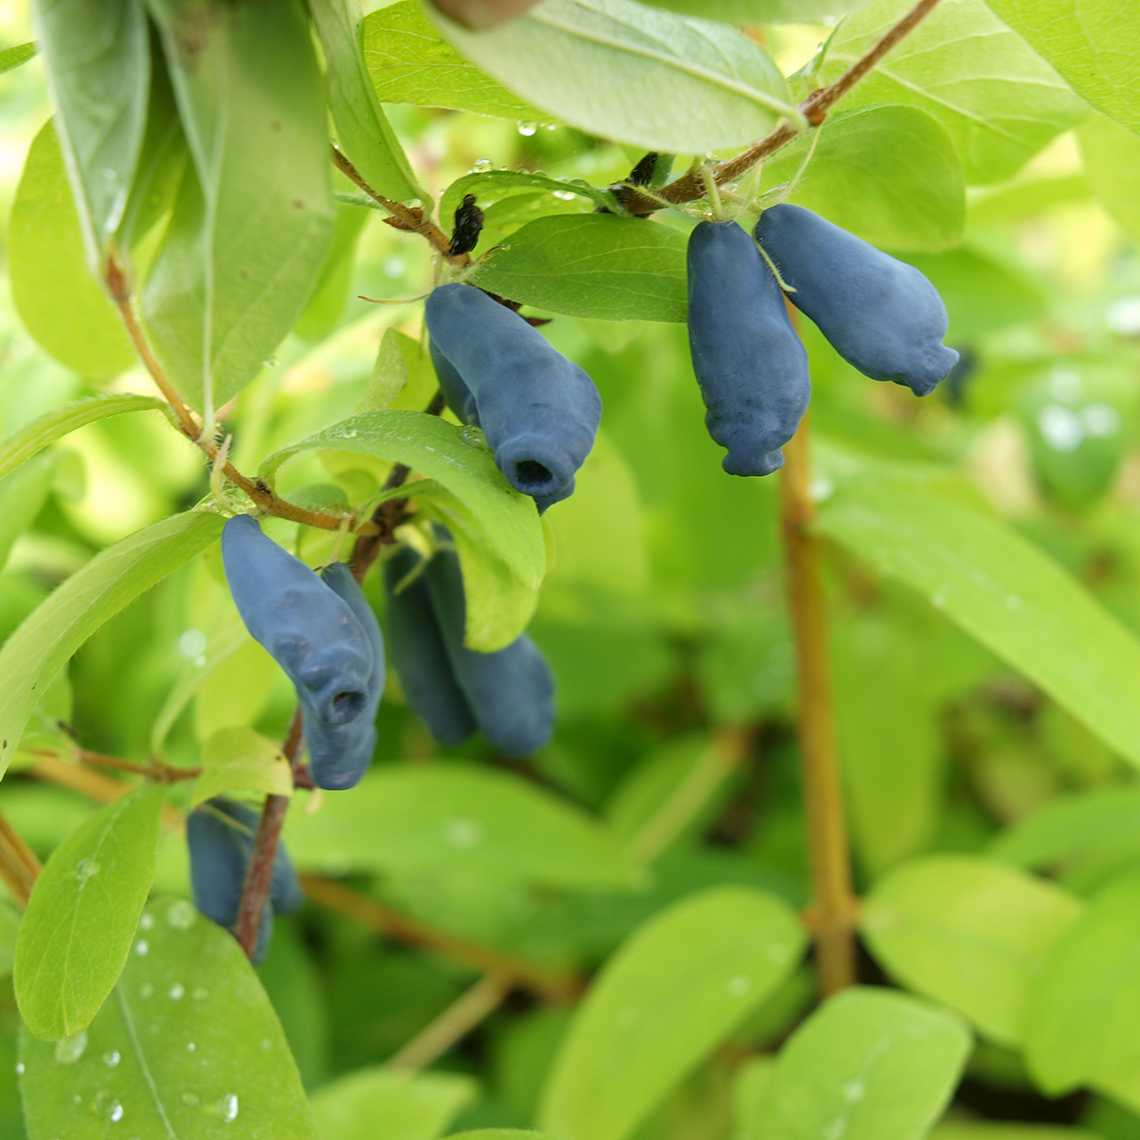 Close up of blue Sugar Mountain Eisbar Lonicera berries and green foliage